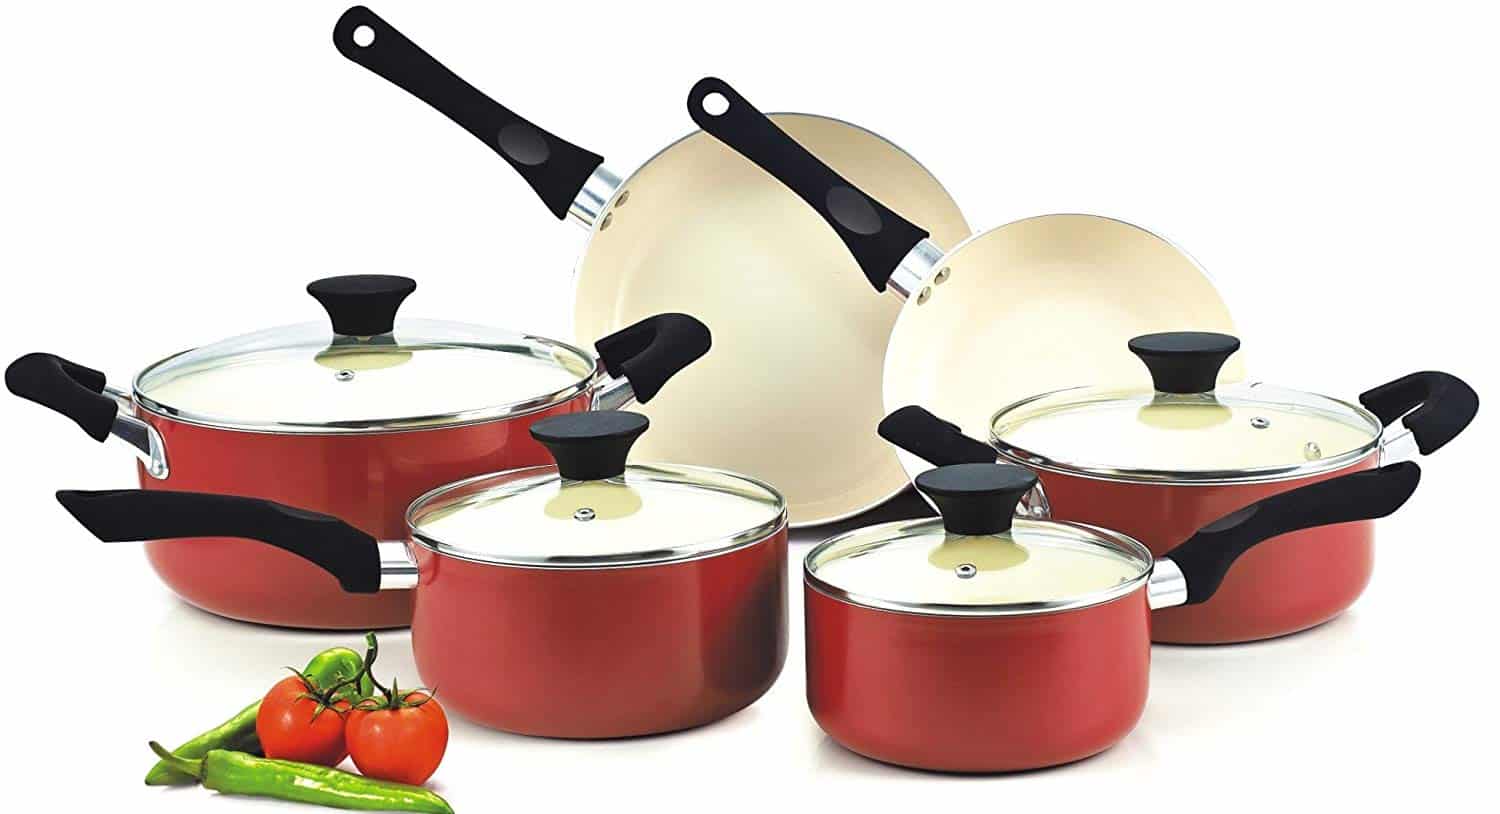 Cook N Home Ceramic Nonstick Cookware Review